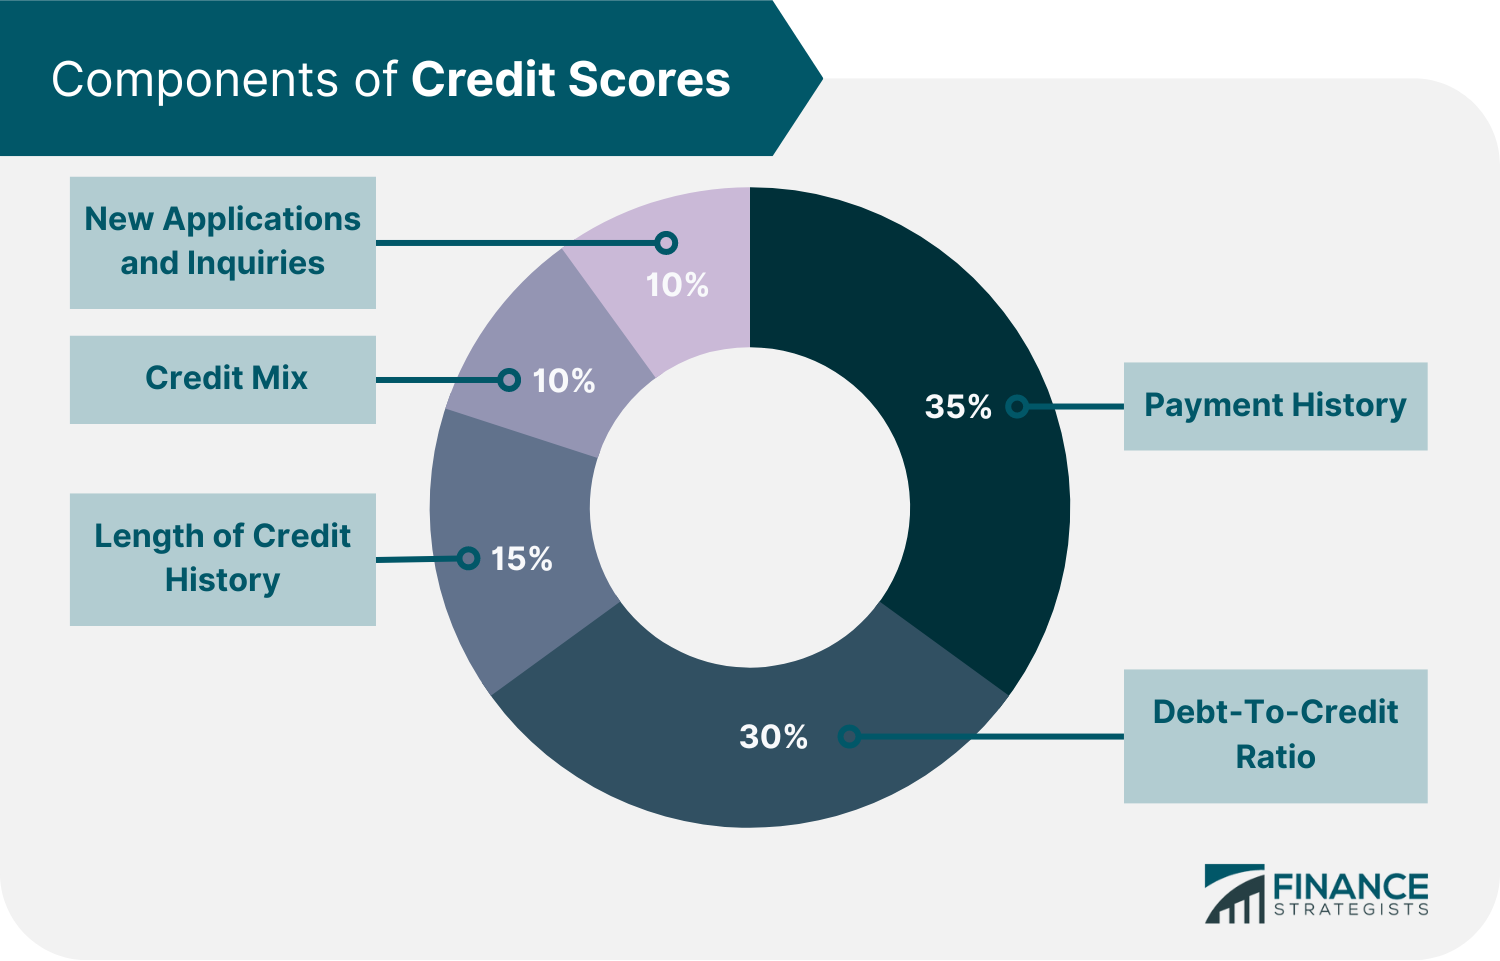 Components of Credit Scores